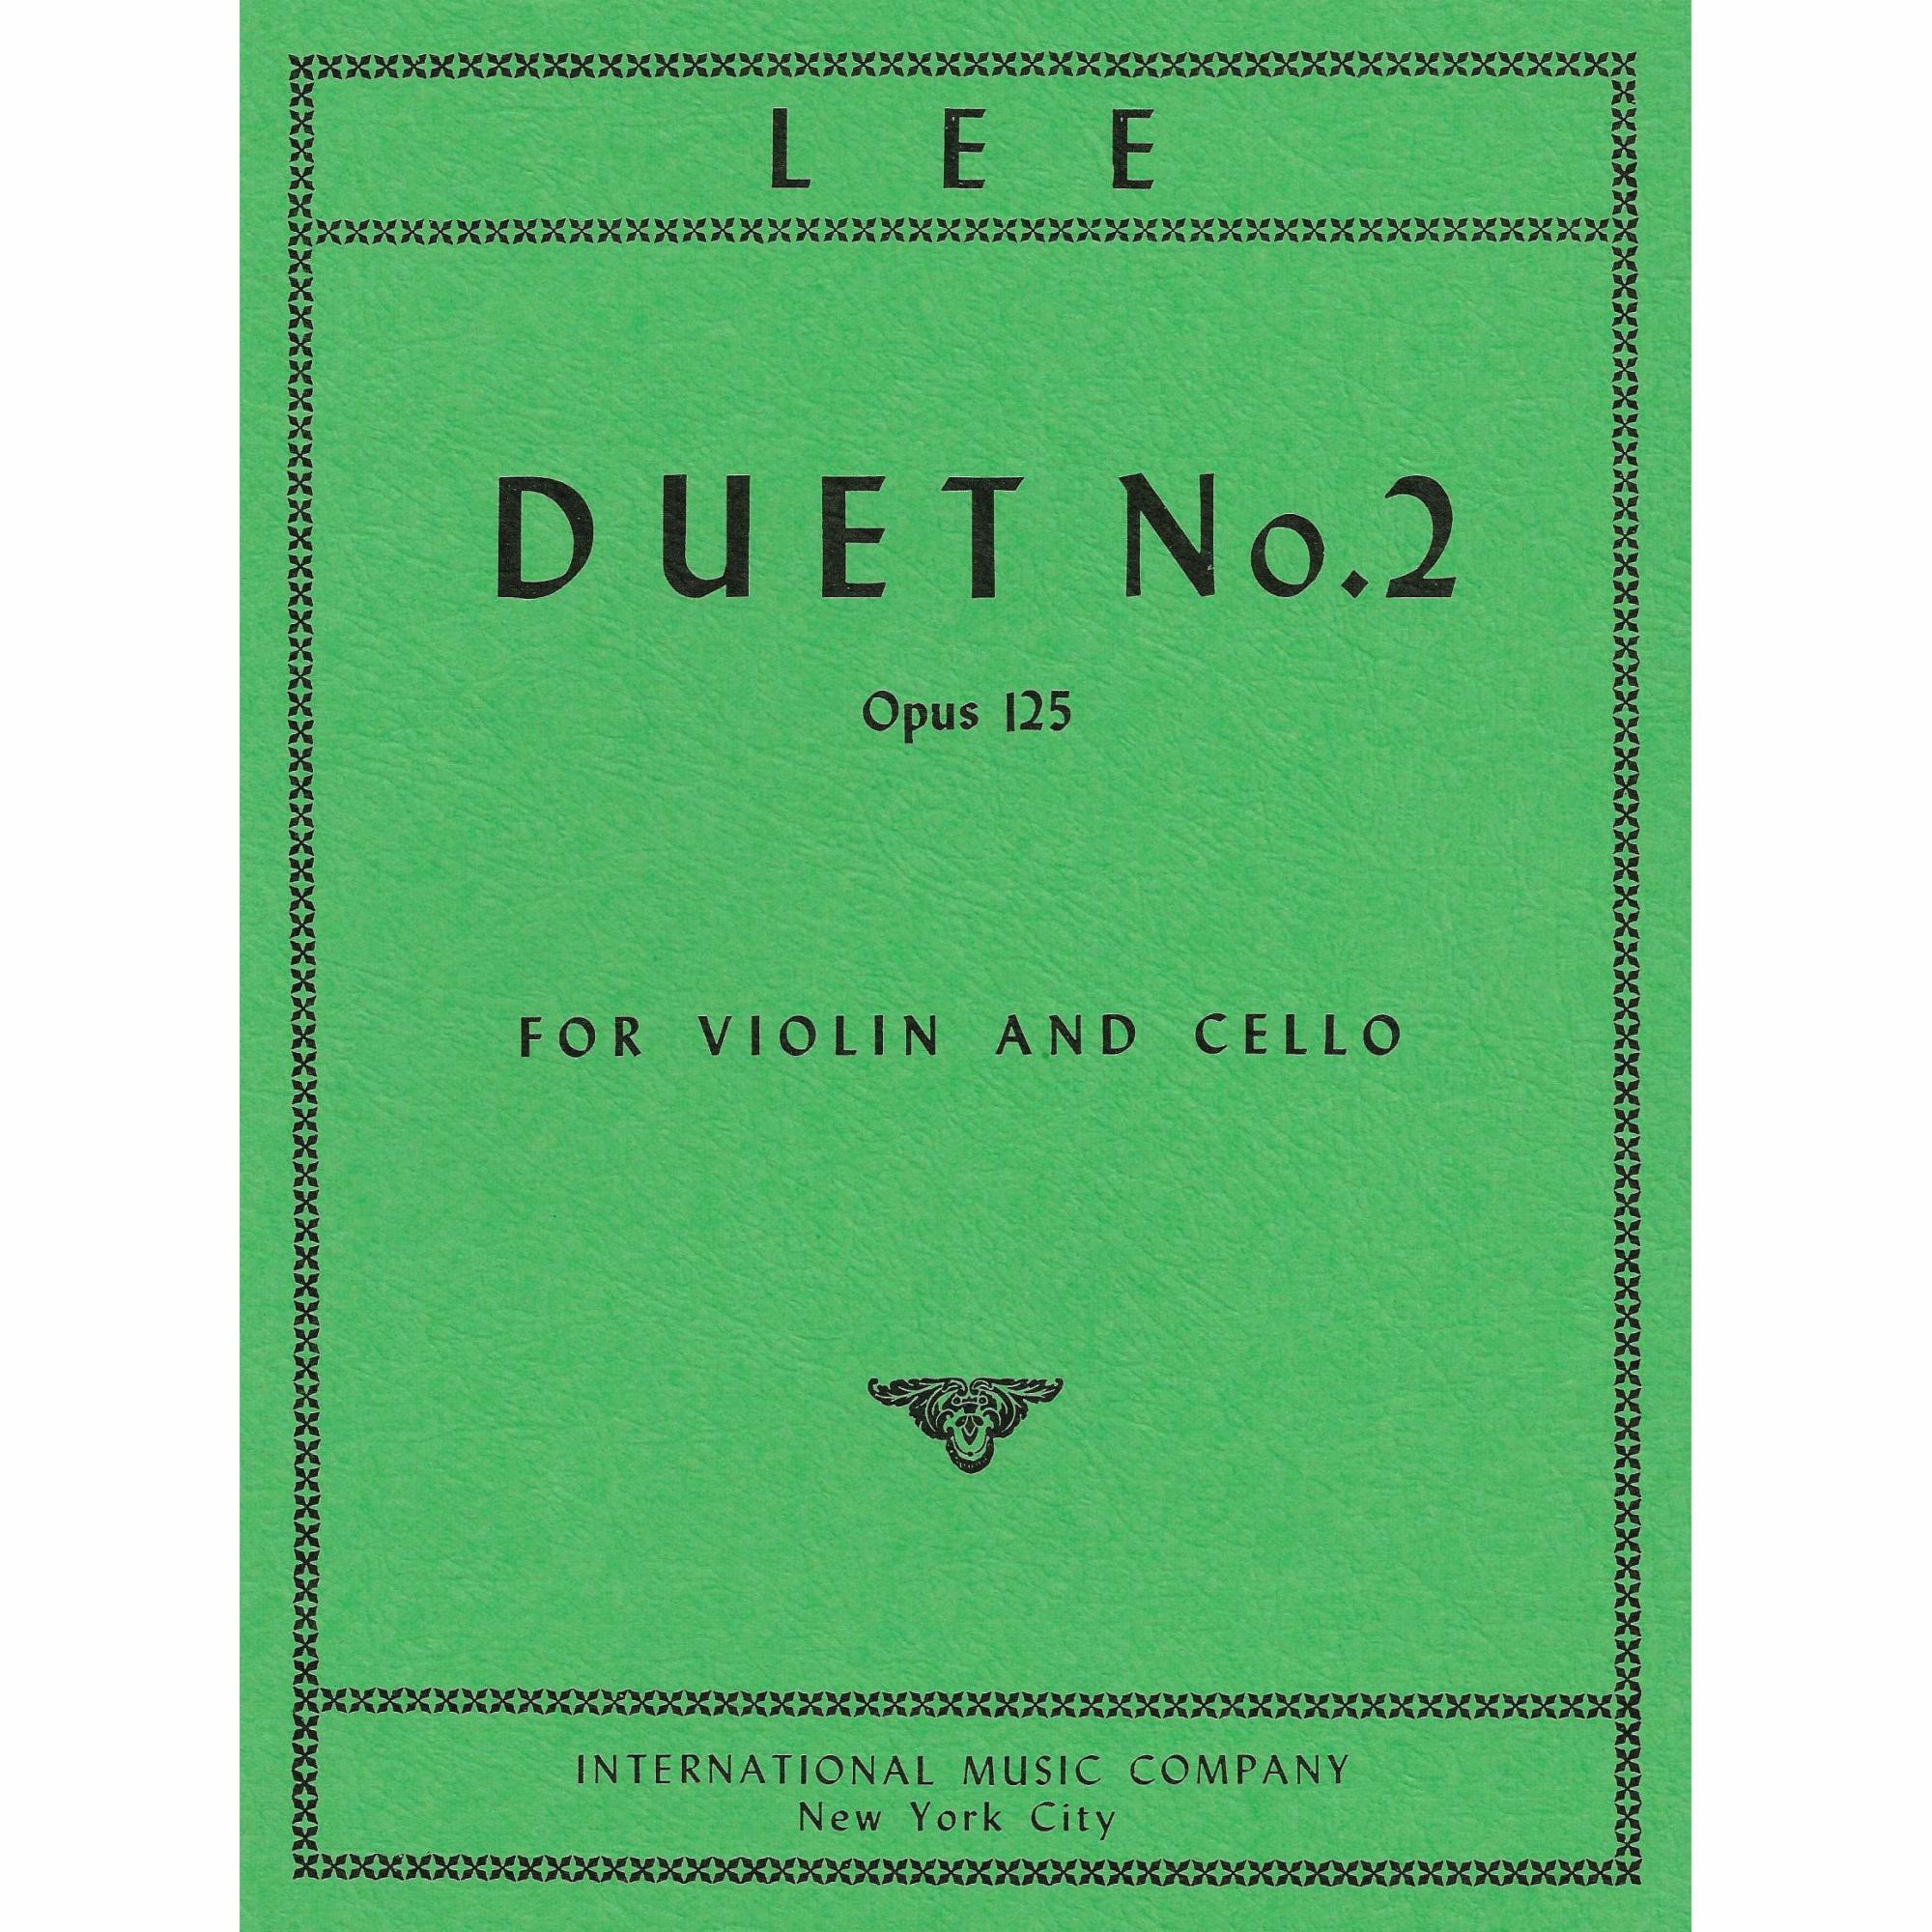 Lee -- Duet No. 2, Op. 125 for Violin and Cello